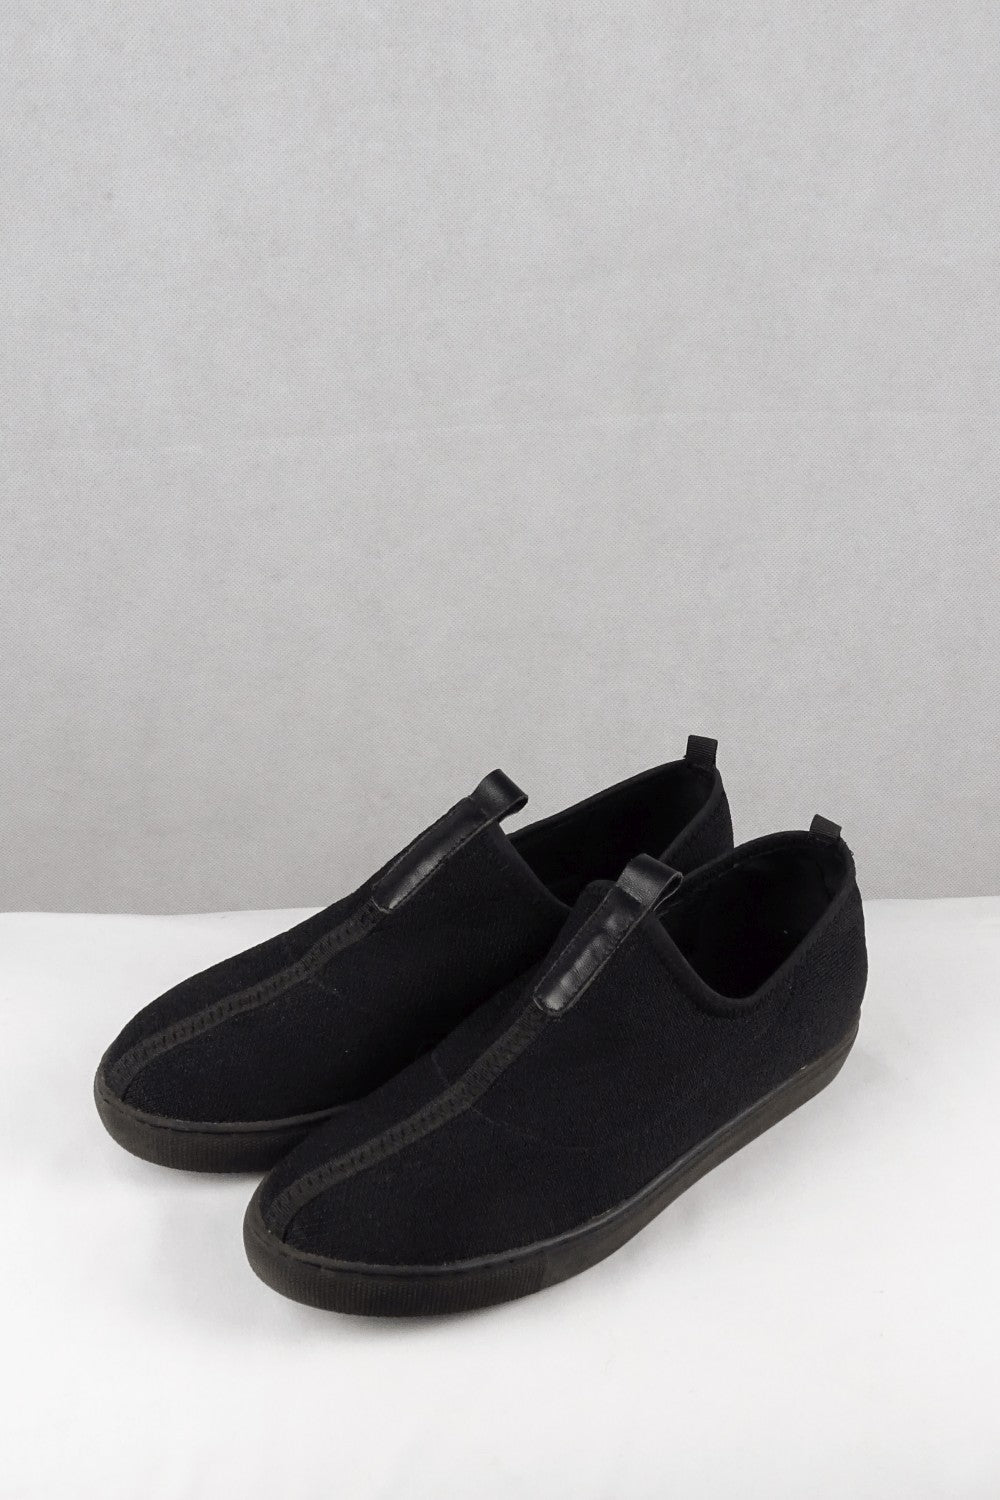 Lady Rose Black Loafers 8